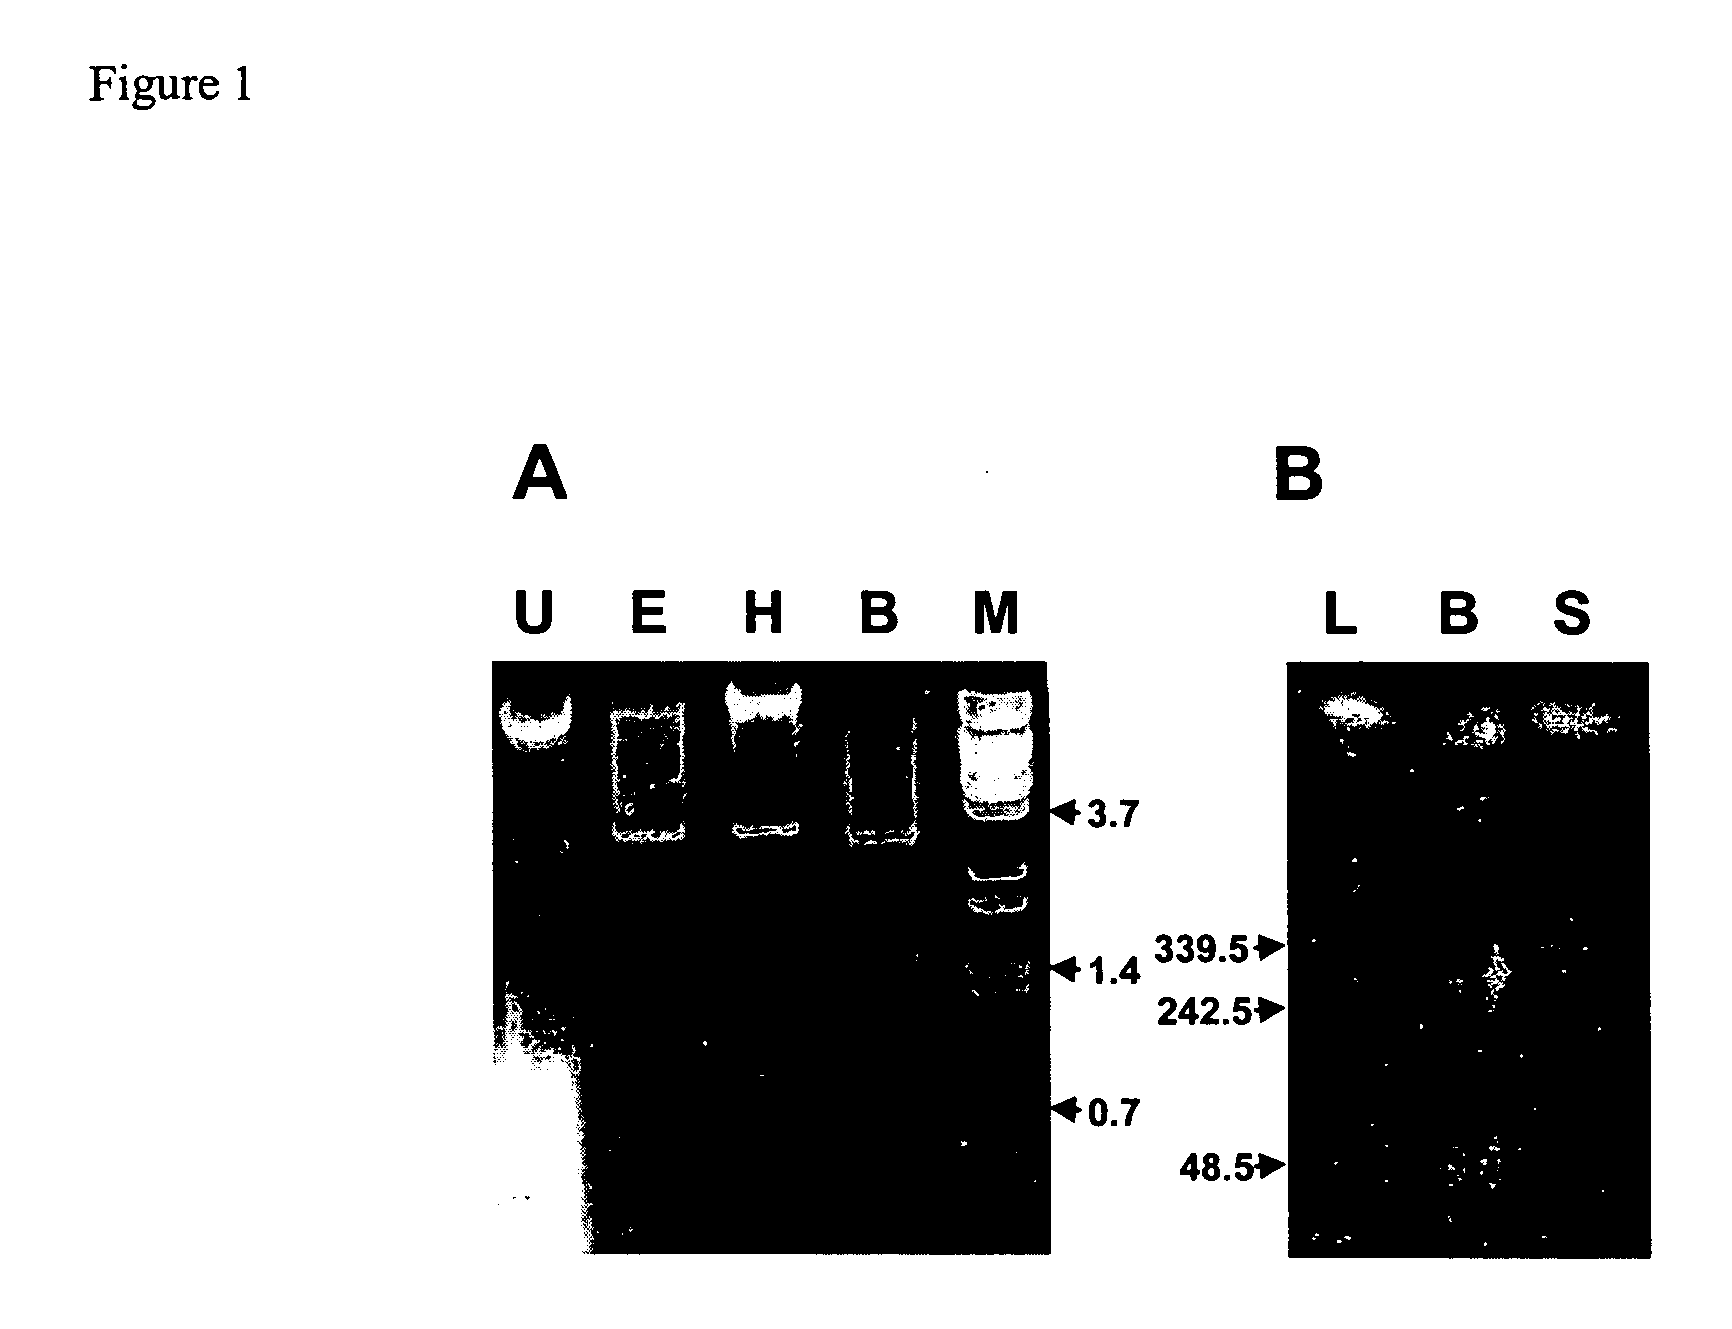 Novel compositions and methods for genetic manipulation of Rhodococcus bacteria